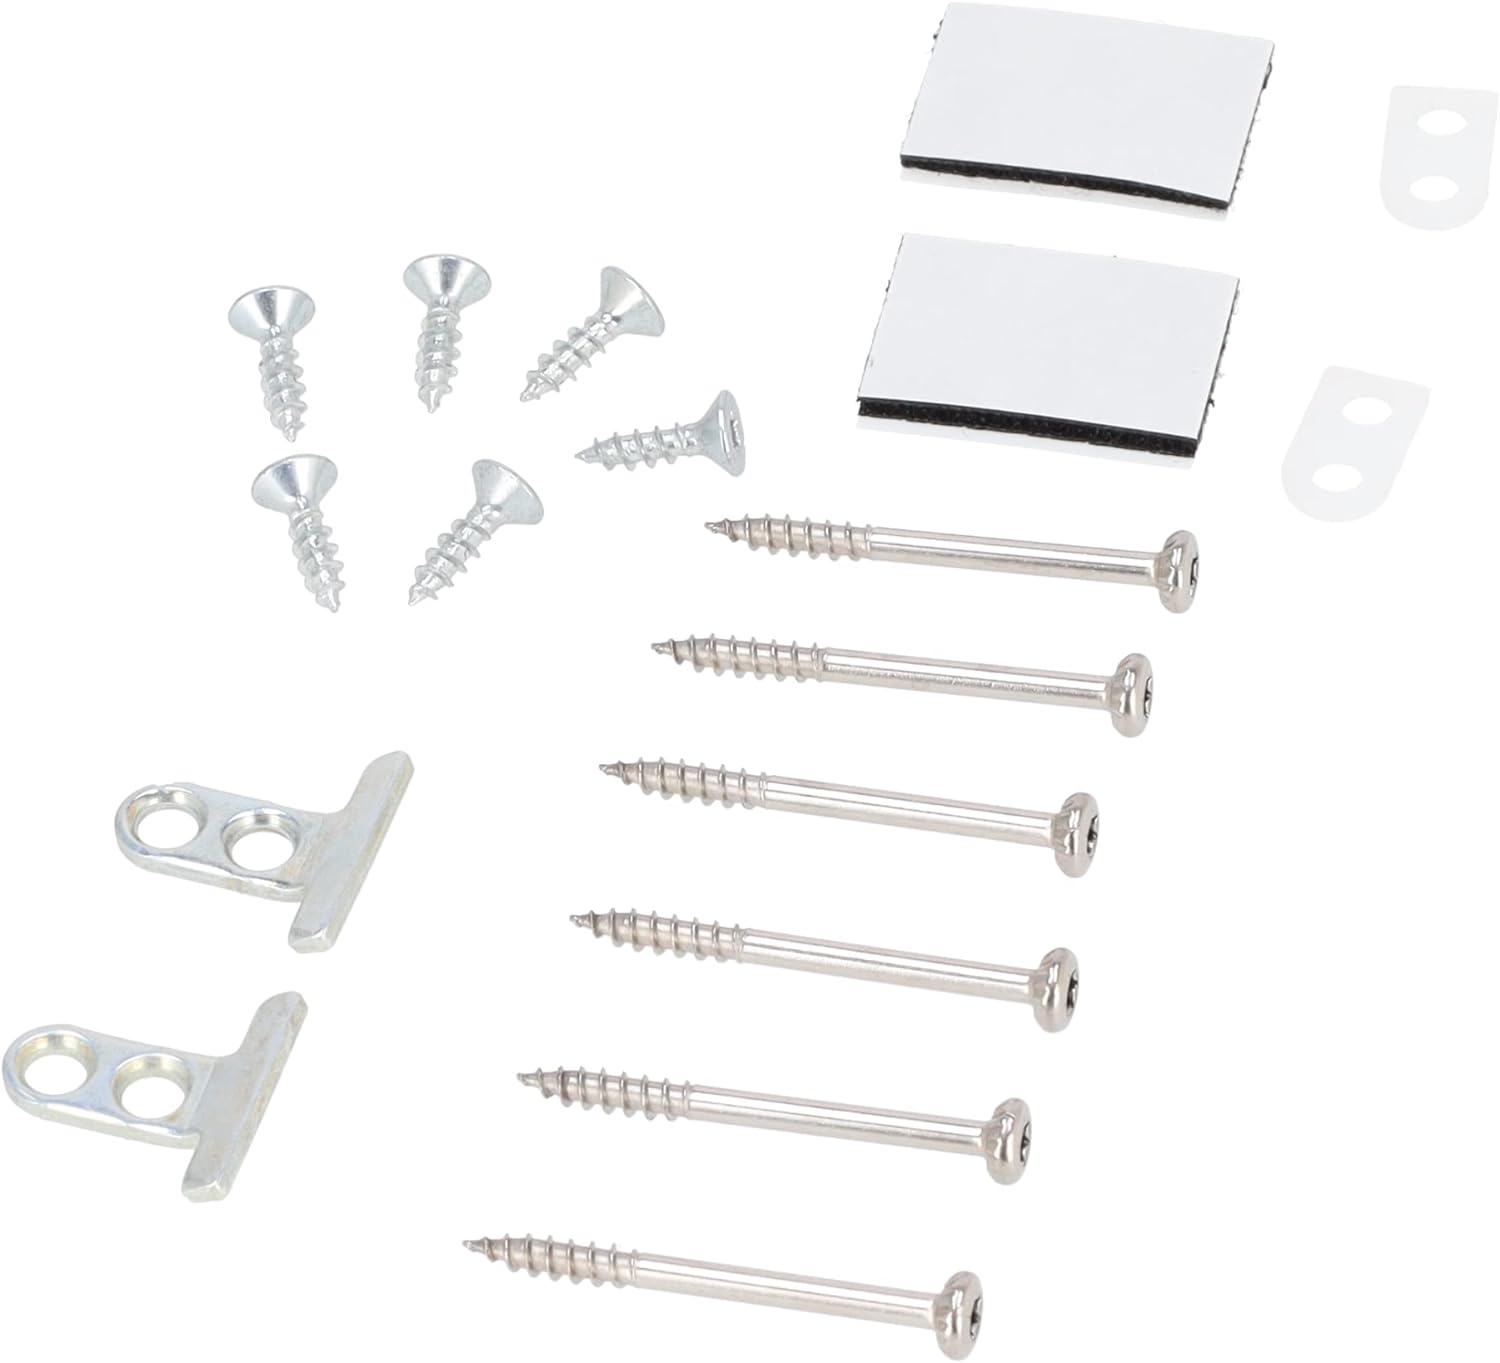 sparefixd Integrated Cupboard Door Mounting Kit to Fit Gorenje Dishwasher - Amazing Gadgets Outlet